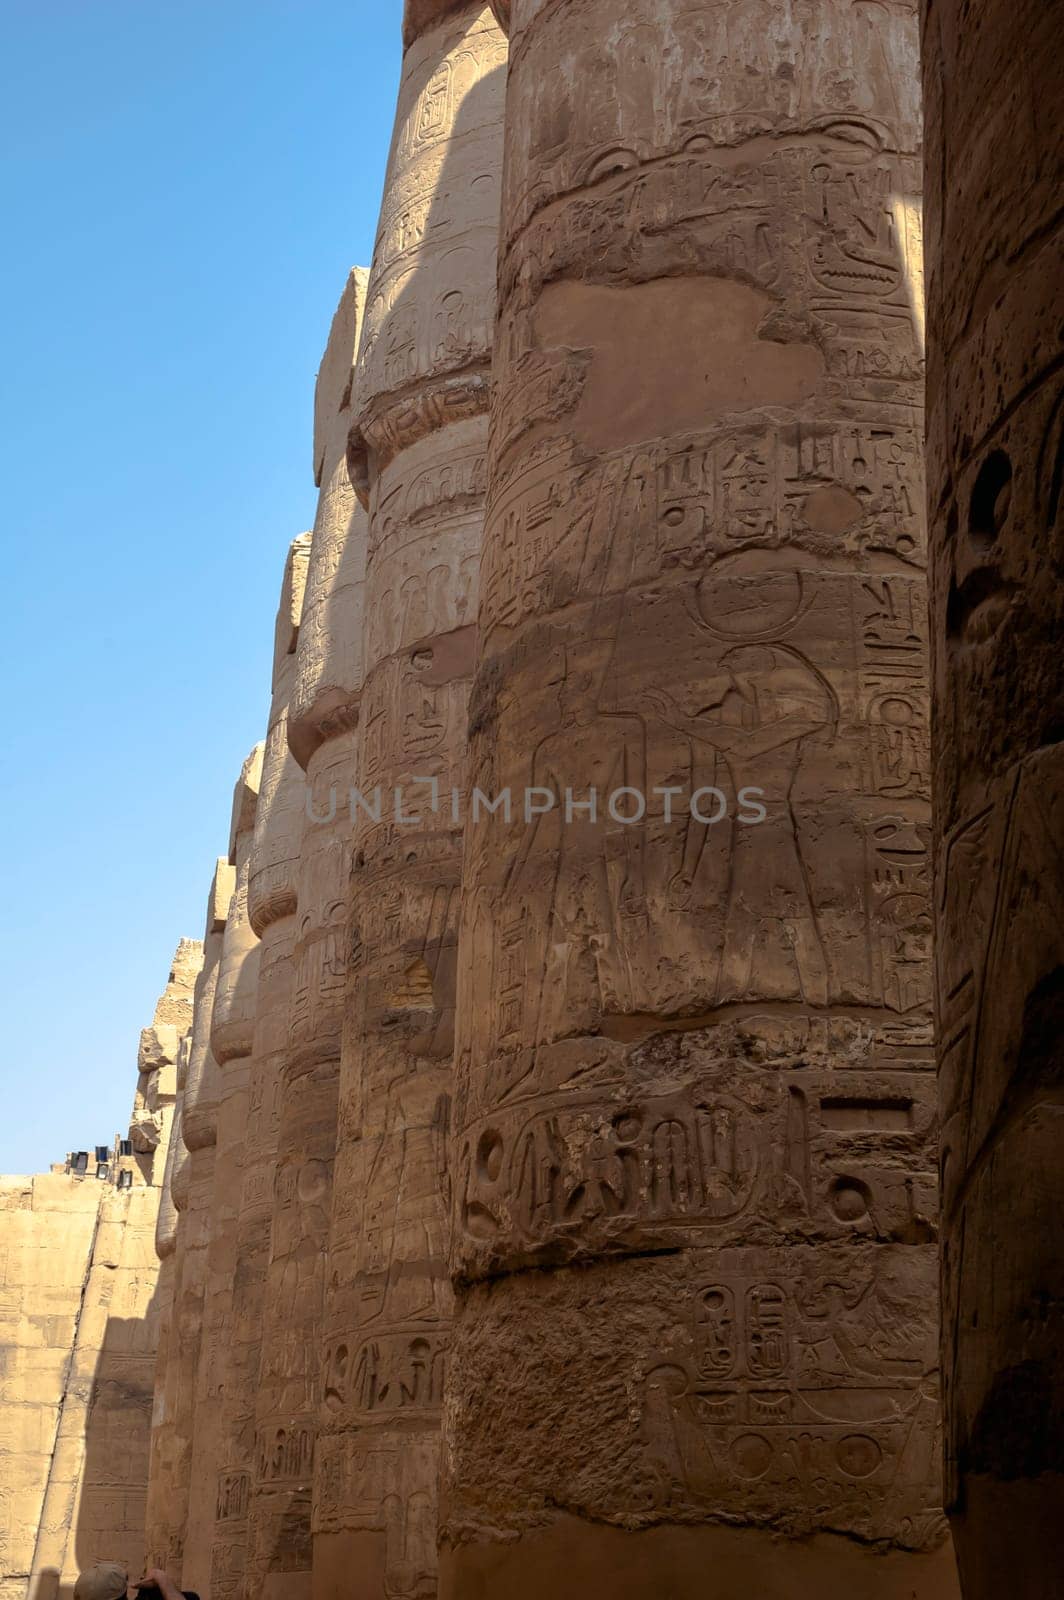 Luxor, Egypt - April 15 2008: Tourists visiting the Temple of Amun in Karnak complex, Luxor, Egypt